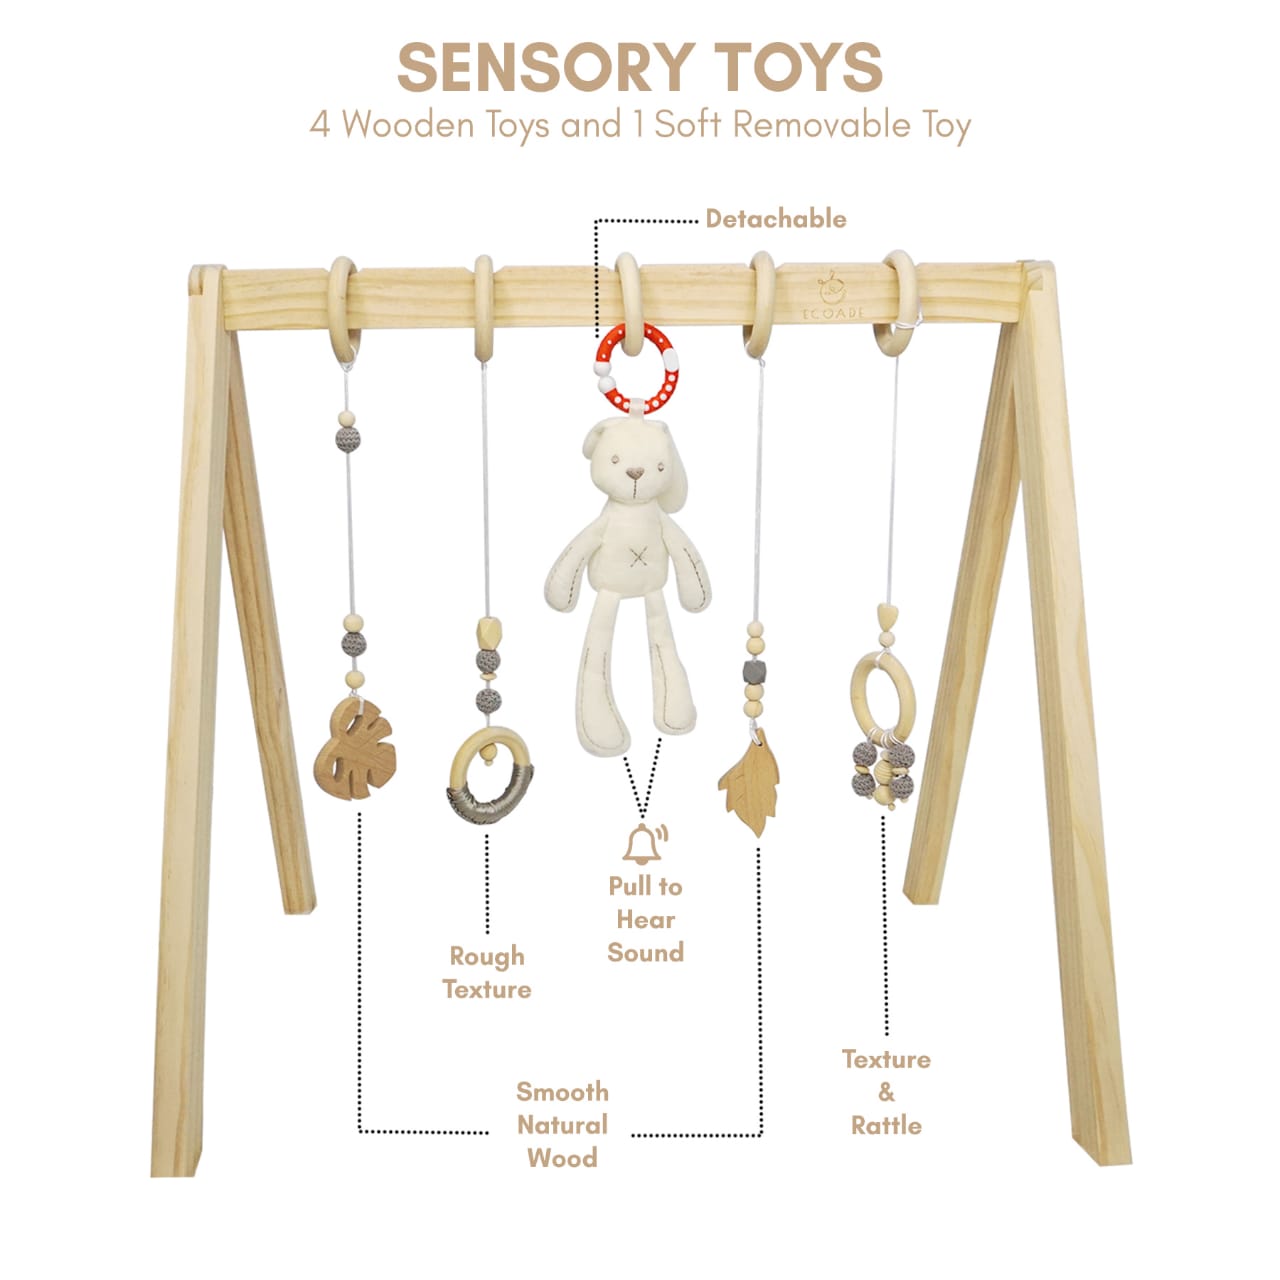 Wooden Play Gym - Activity Gym for Baby with 4 Hanging Wooden Baby Toys and 1 Bunny Rattle, Gender Neutral Boho Nursery Decor